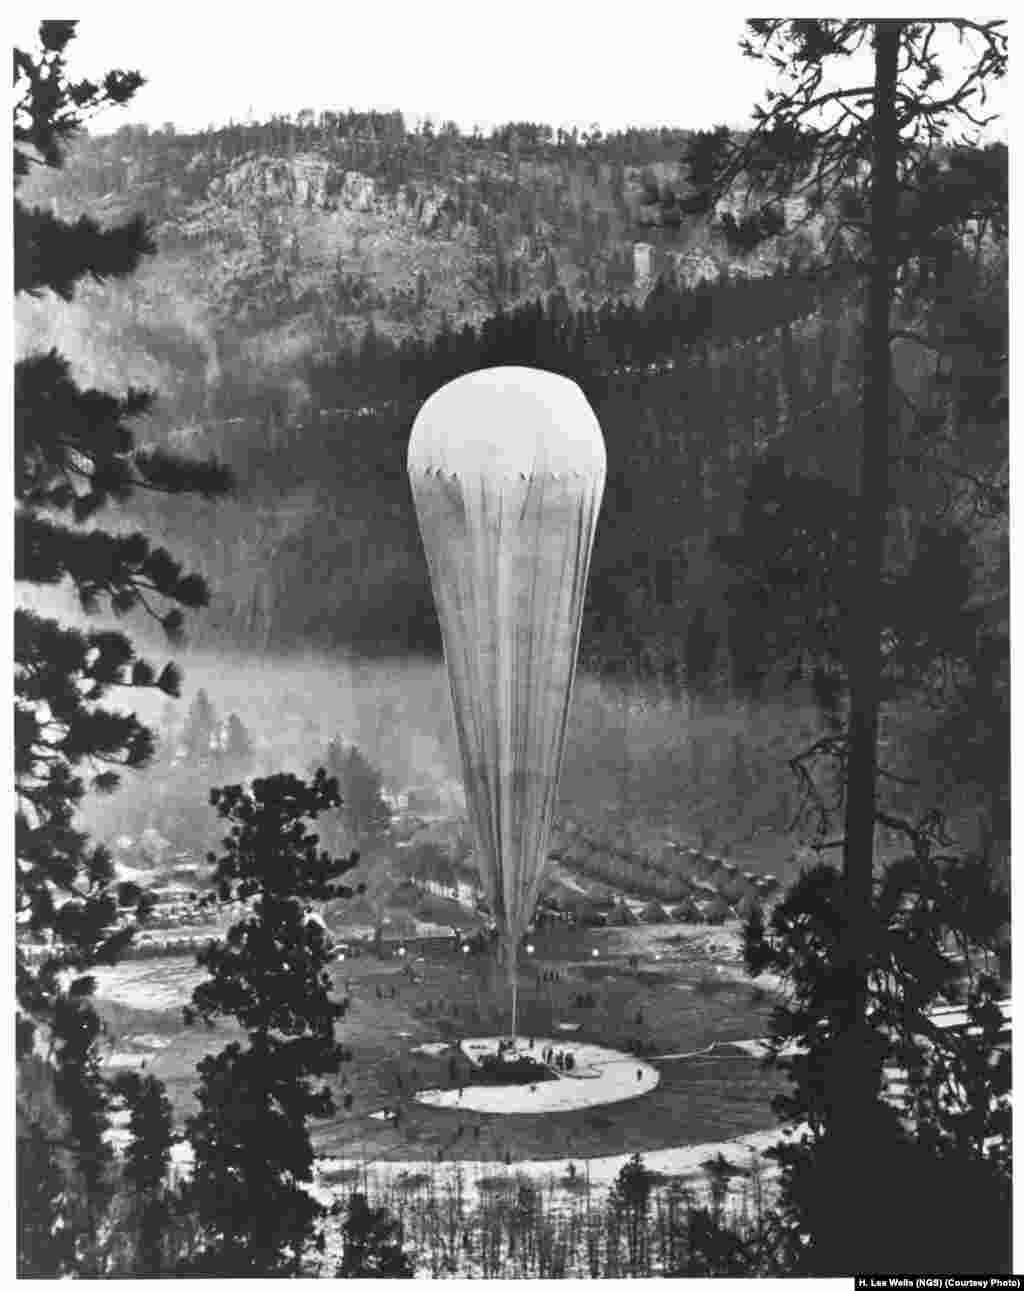 The National Geographic-Army Air Corps stratosphere balloon &quot;Explorer II&quot; prepares to rise from the Stratobowl near Rapid City, South Dakota on November 11, 1935. It carried two &ldquo;aeronauts&rdquo; more than 22,000 meters into the stratosphere -- the highest humans would go for the next 21 years.